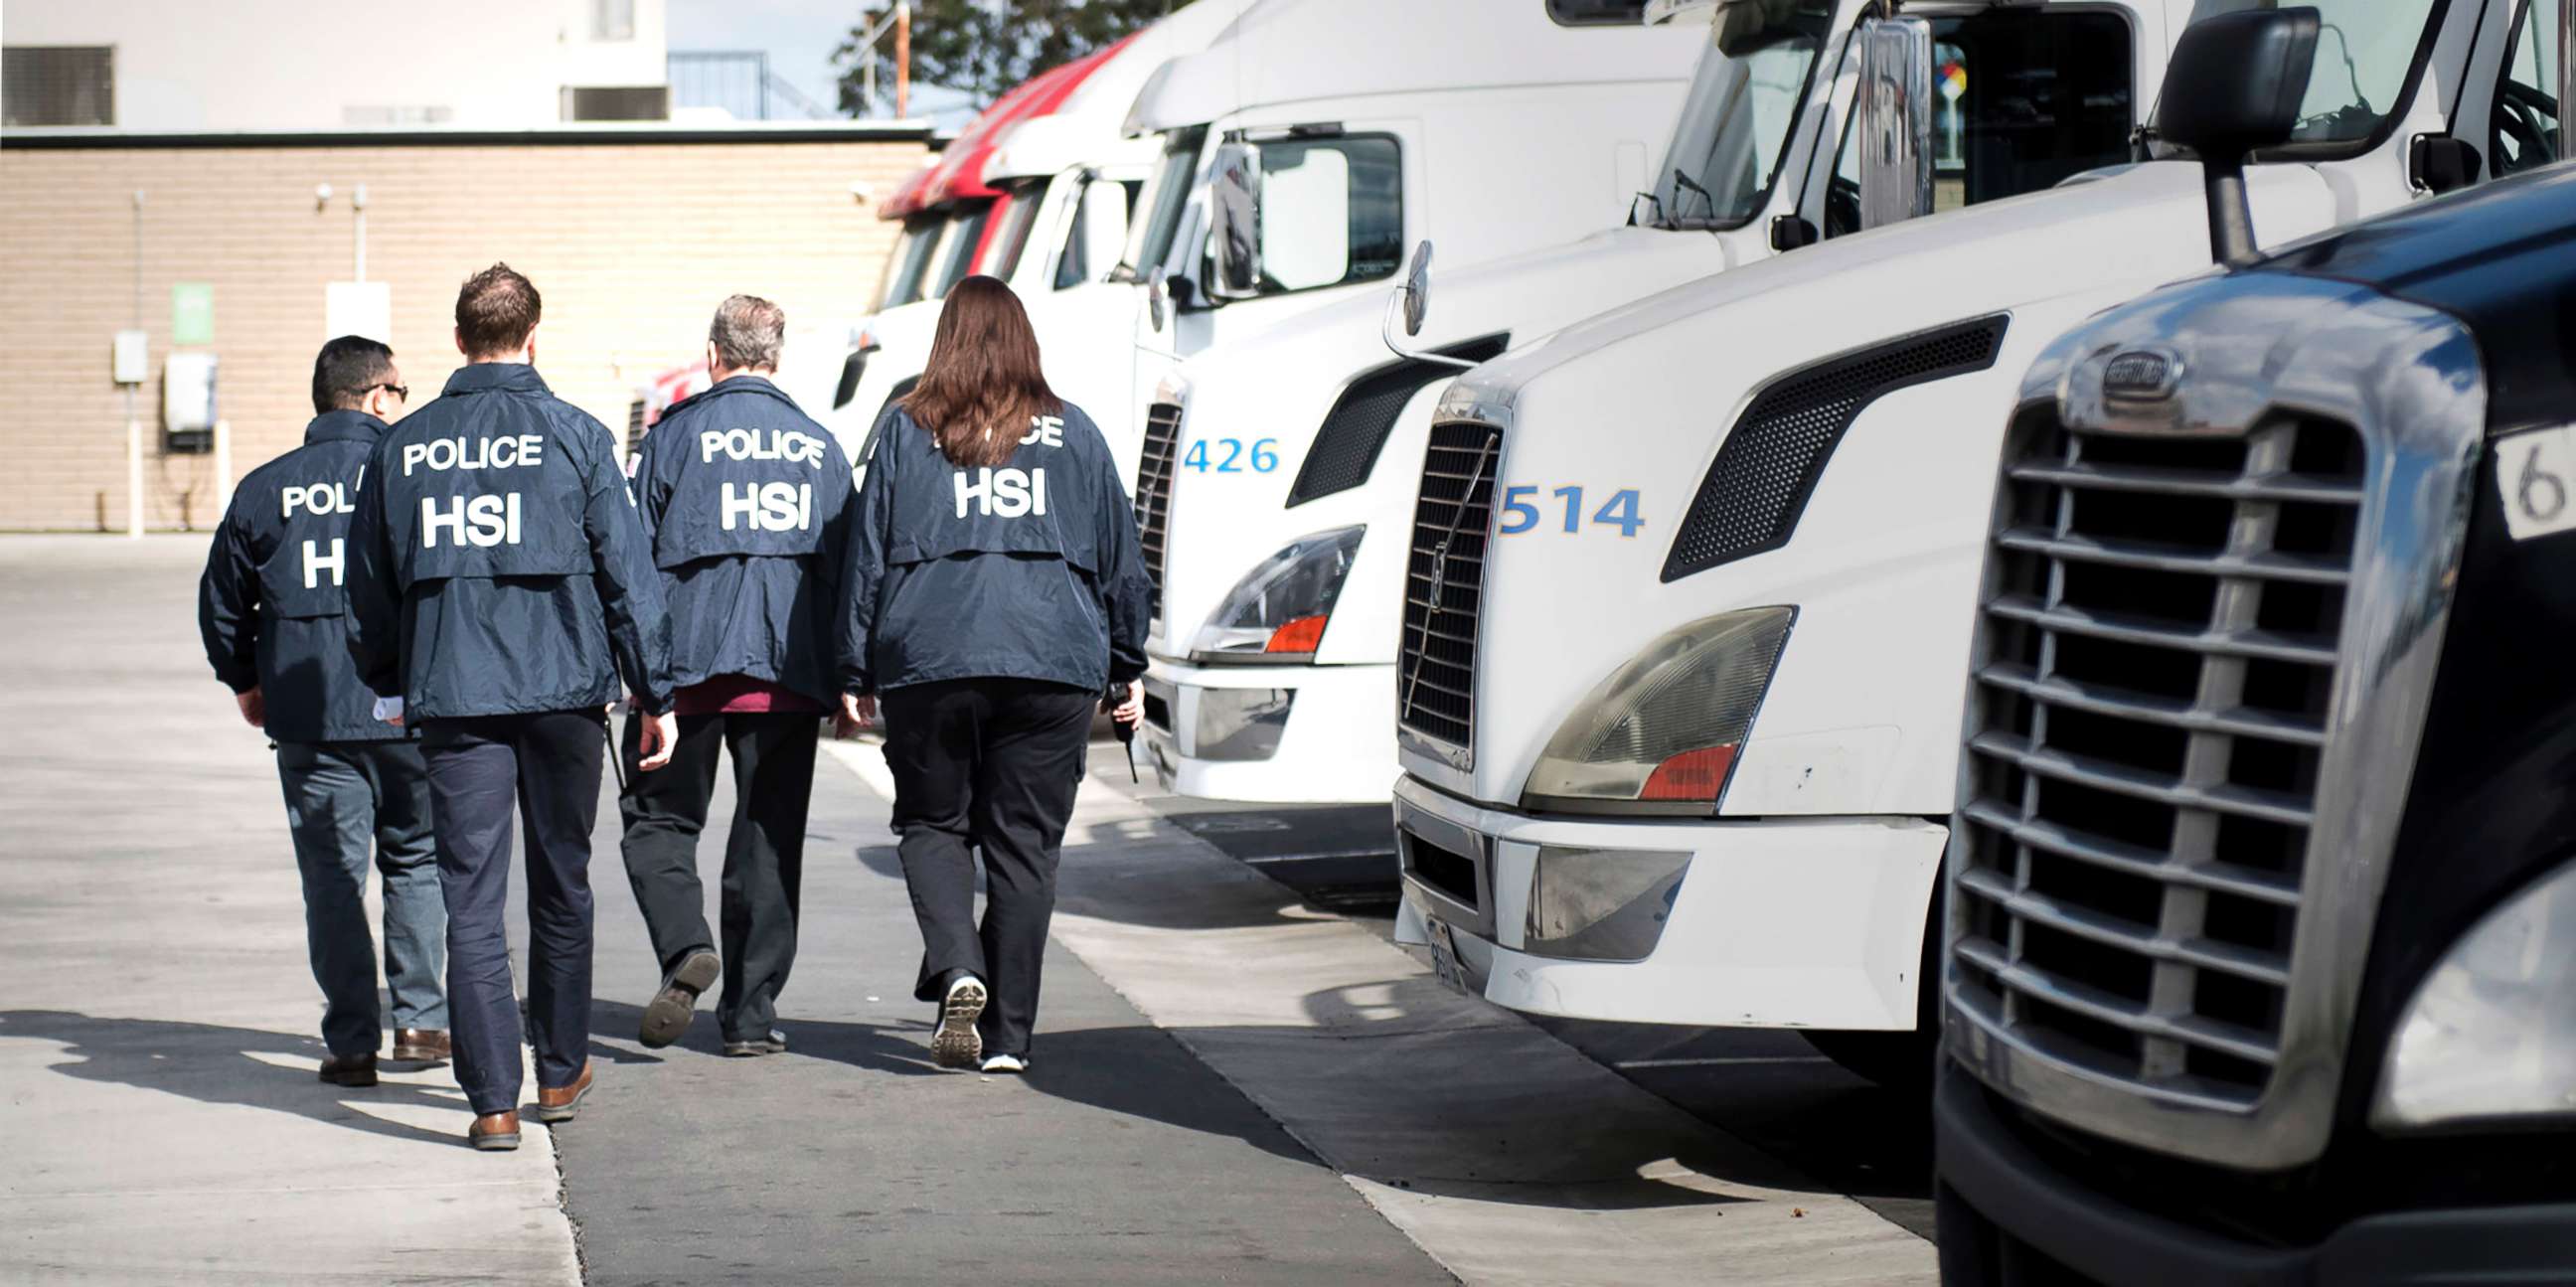 PHOTO: Homeland Security Investigations agents from the U.S. Immigration and Customs Enforcement (ICE) are seen in this undated photo.